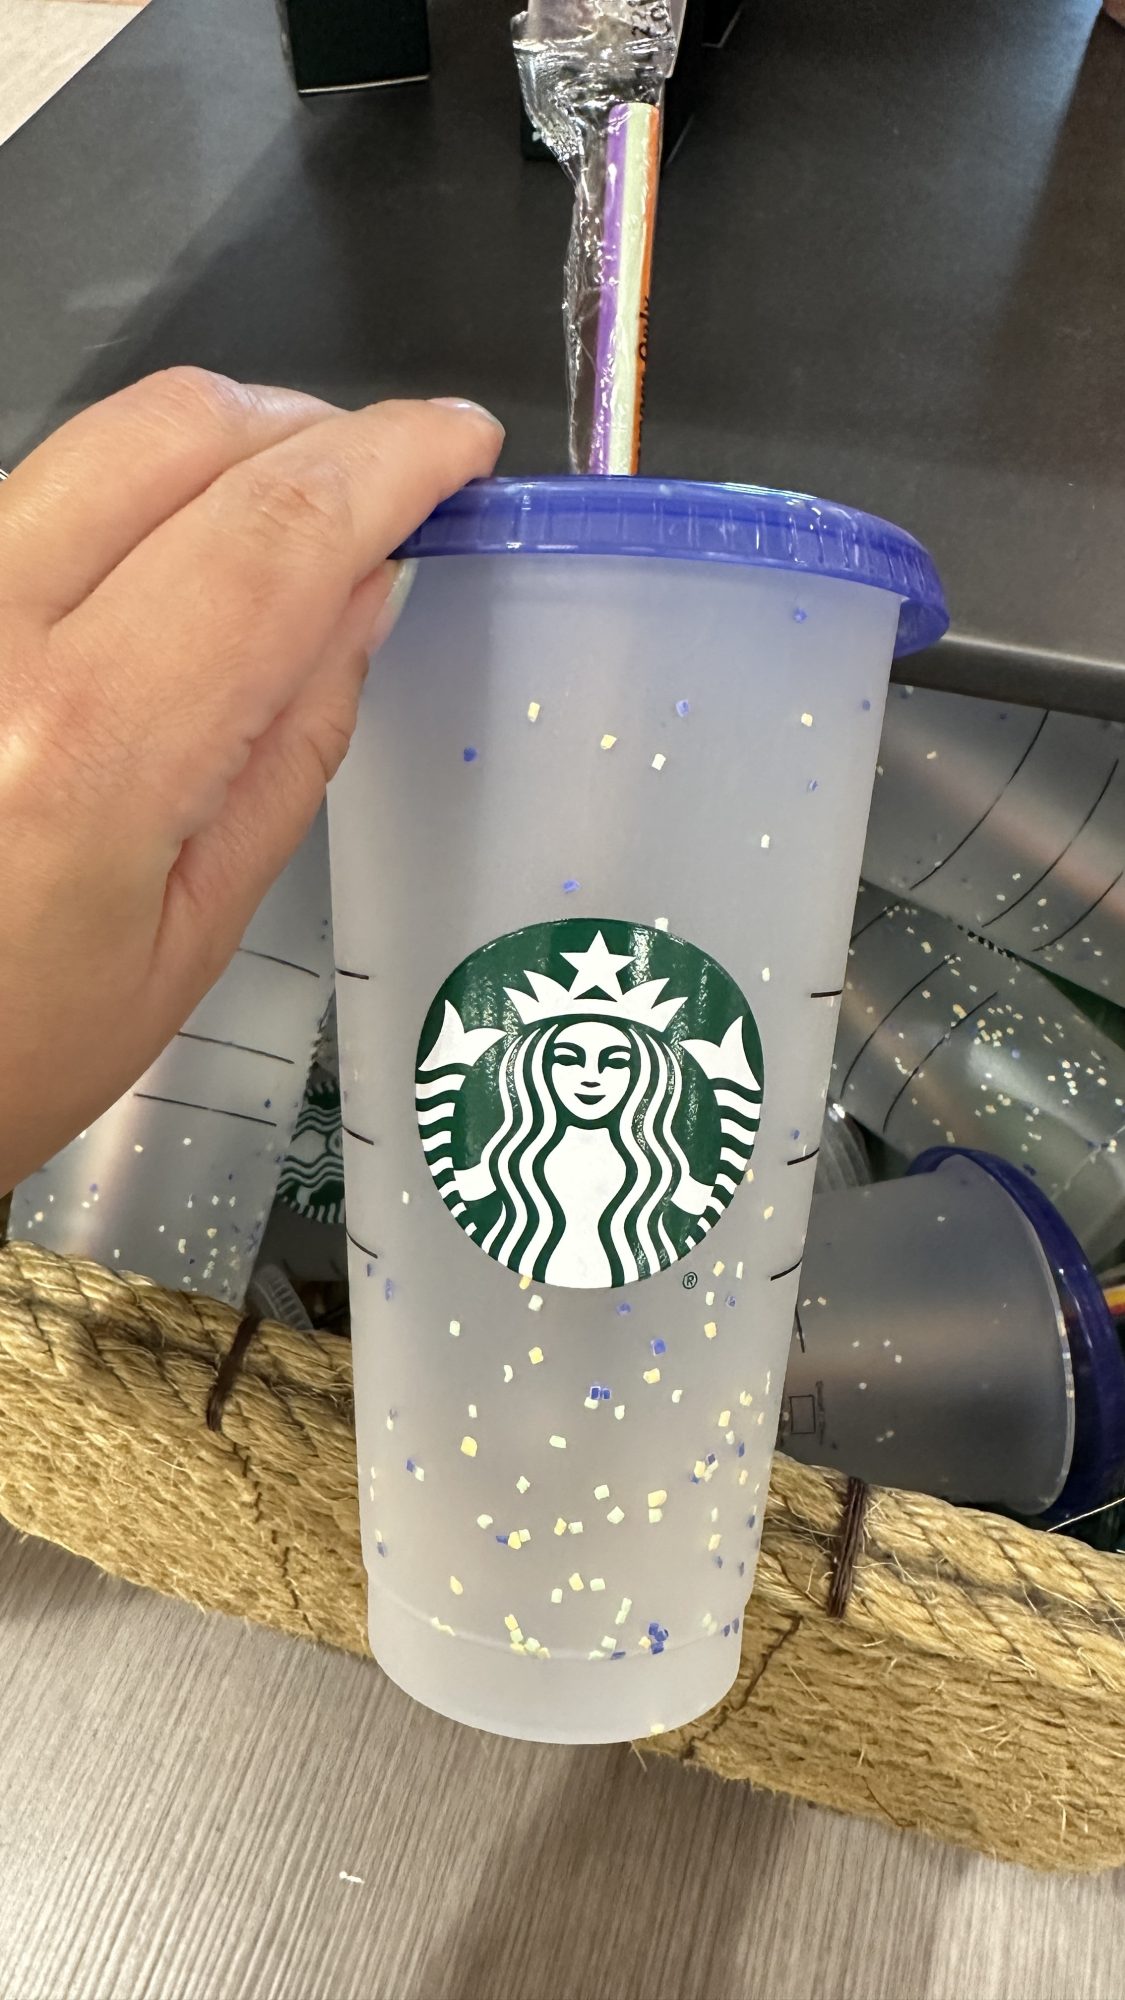 Starbucks Releases Mystery Color Changing Cups and I Want Them All